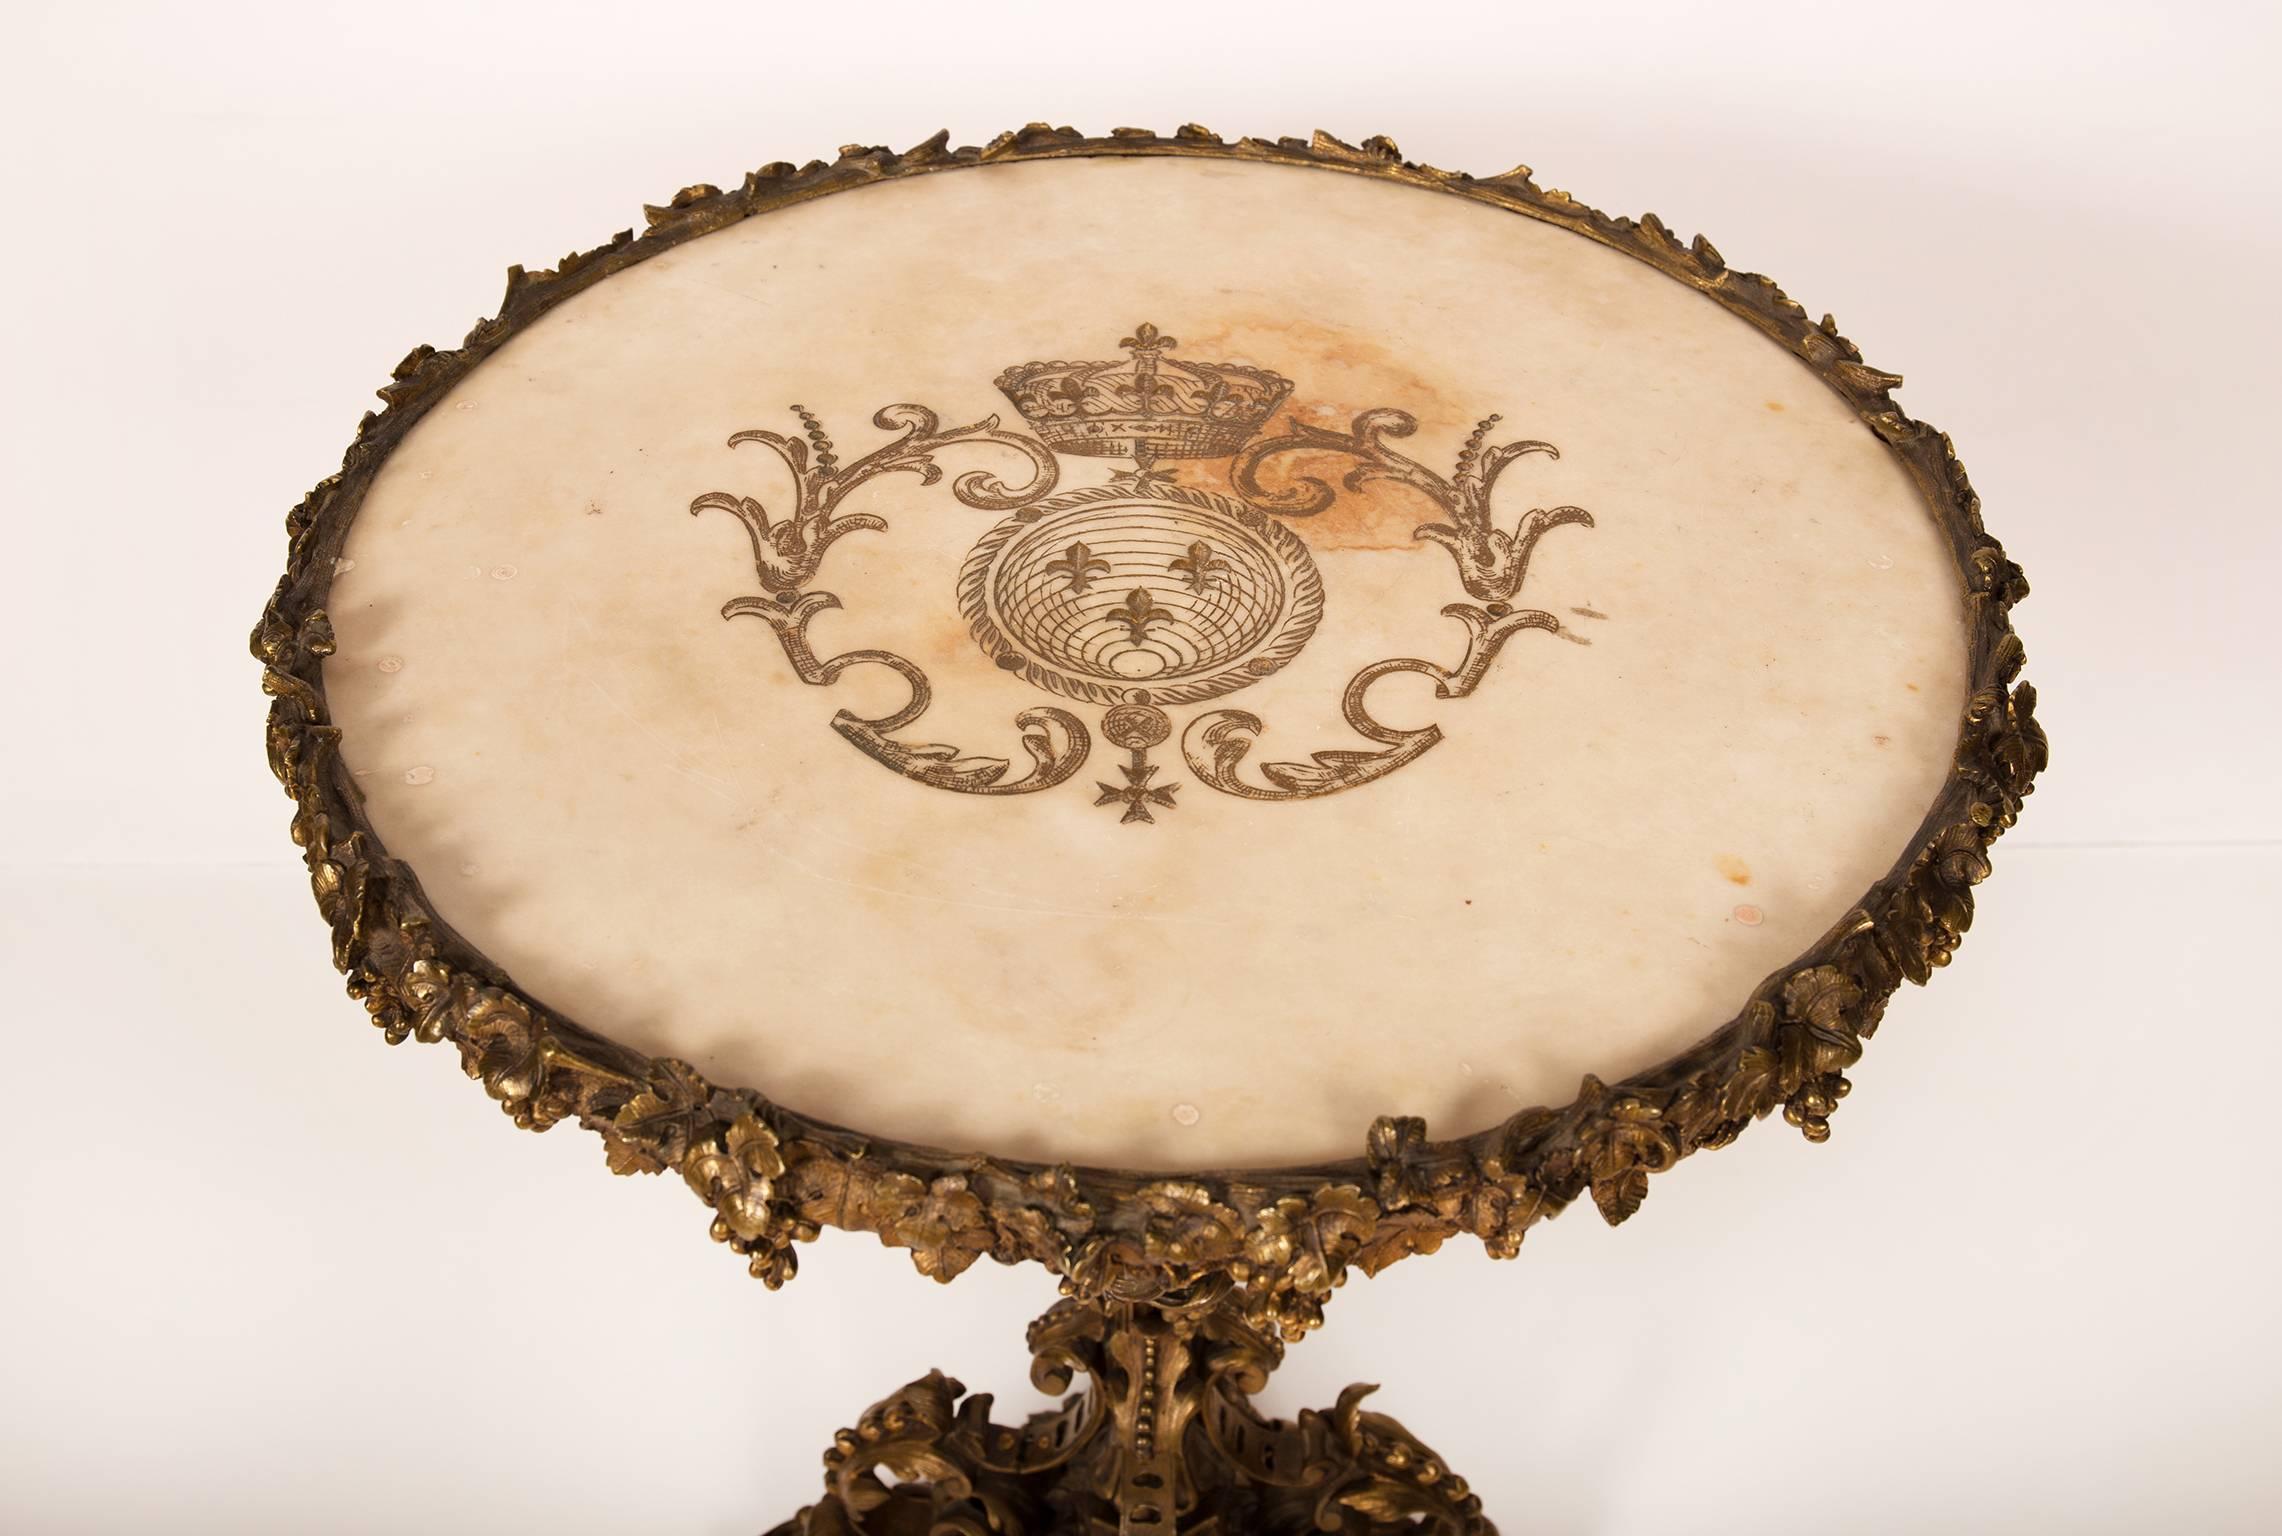 Lovely and rare bronze gueridon table with a white carrara marble top, carved with a polychromed crest of fleur de lys in a cartouche and a Knights Cross. The marble top set in a bronze mount of vineleaves and grapes; the baluster stem with four